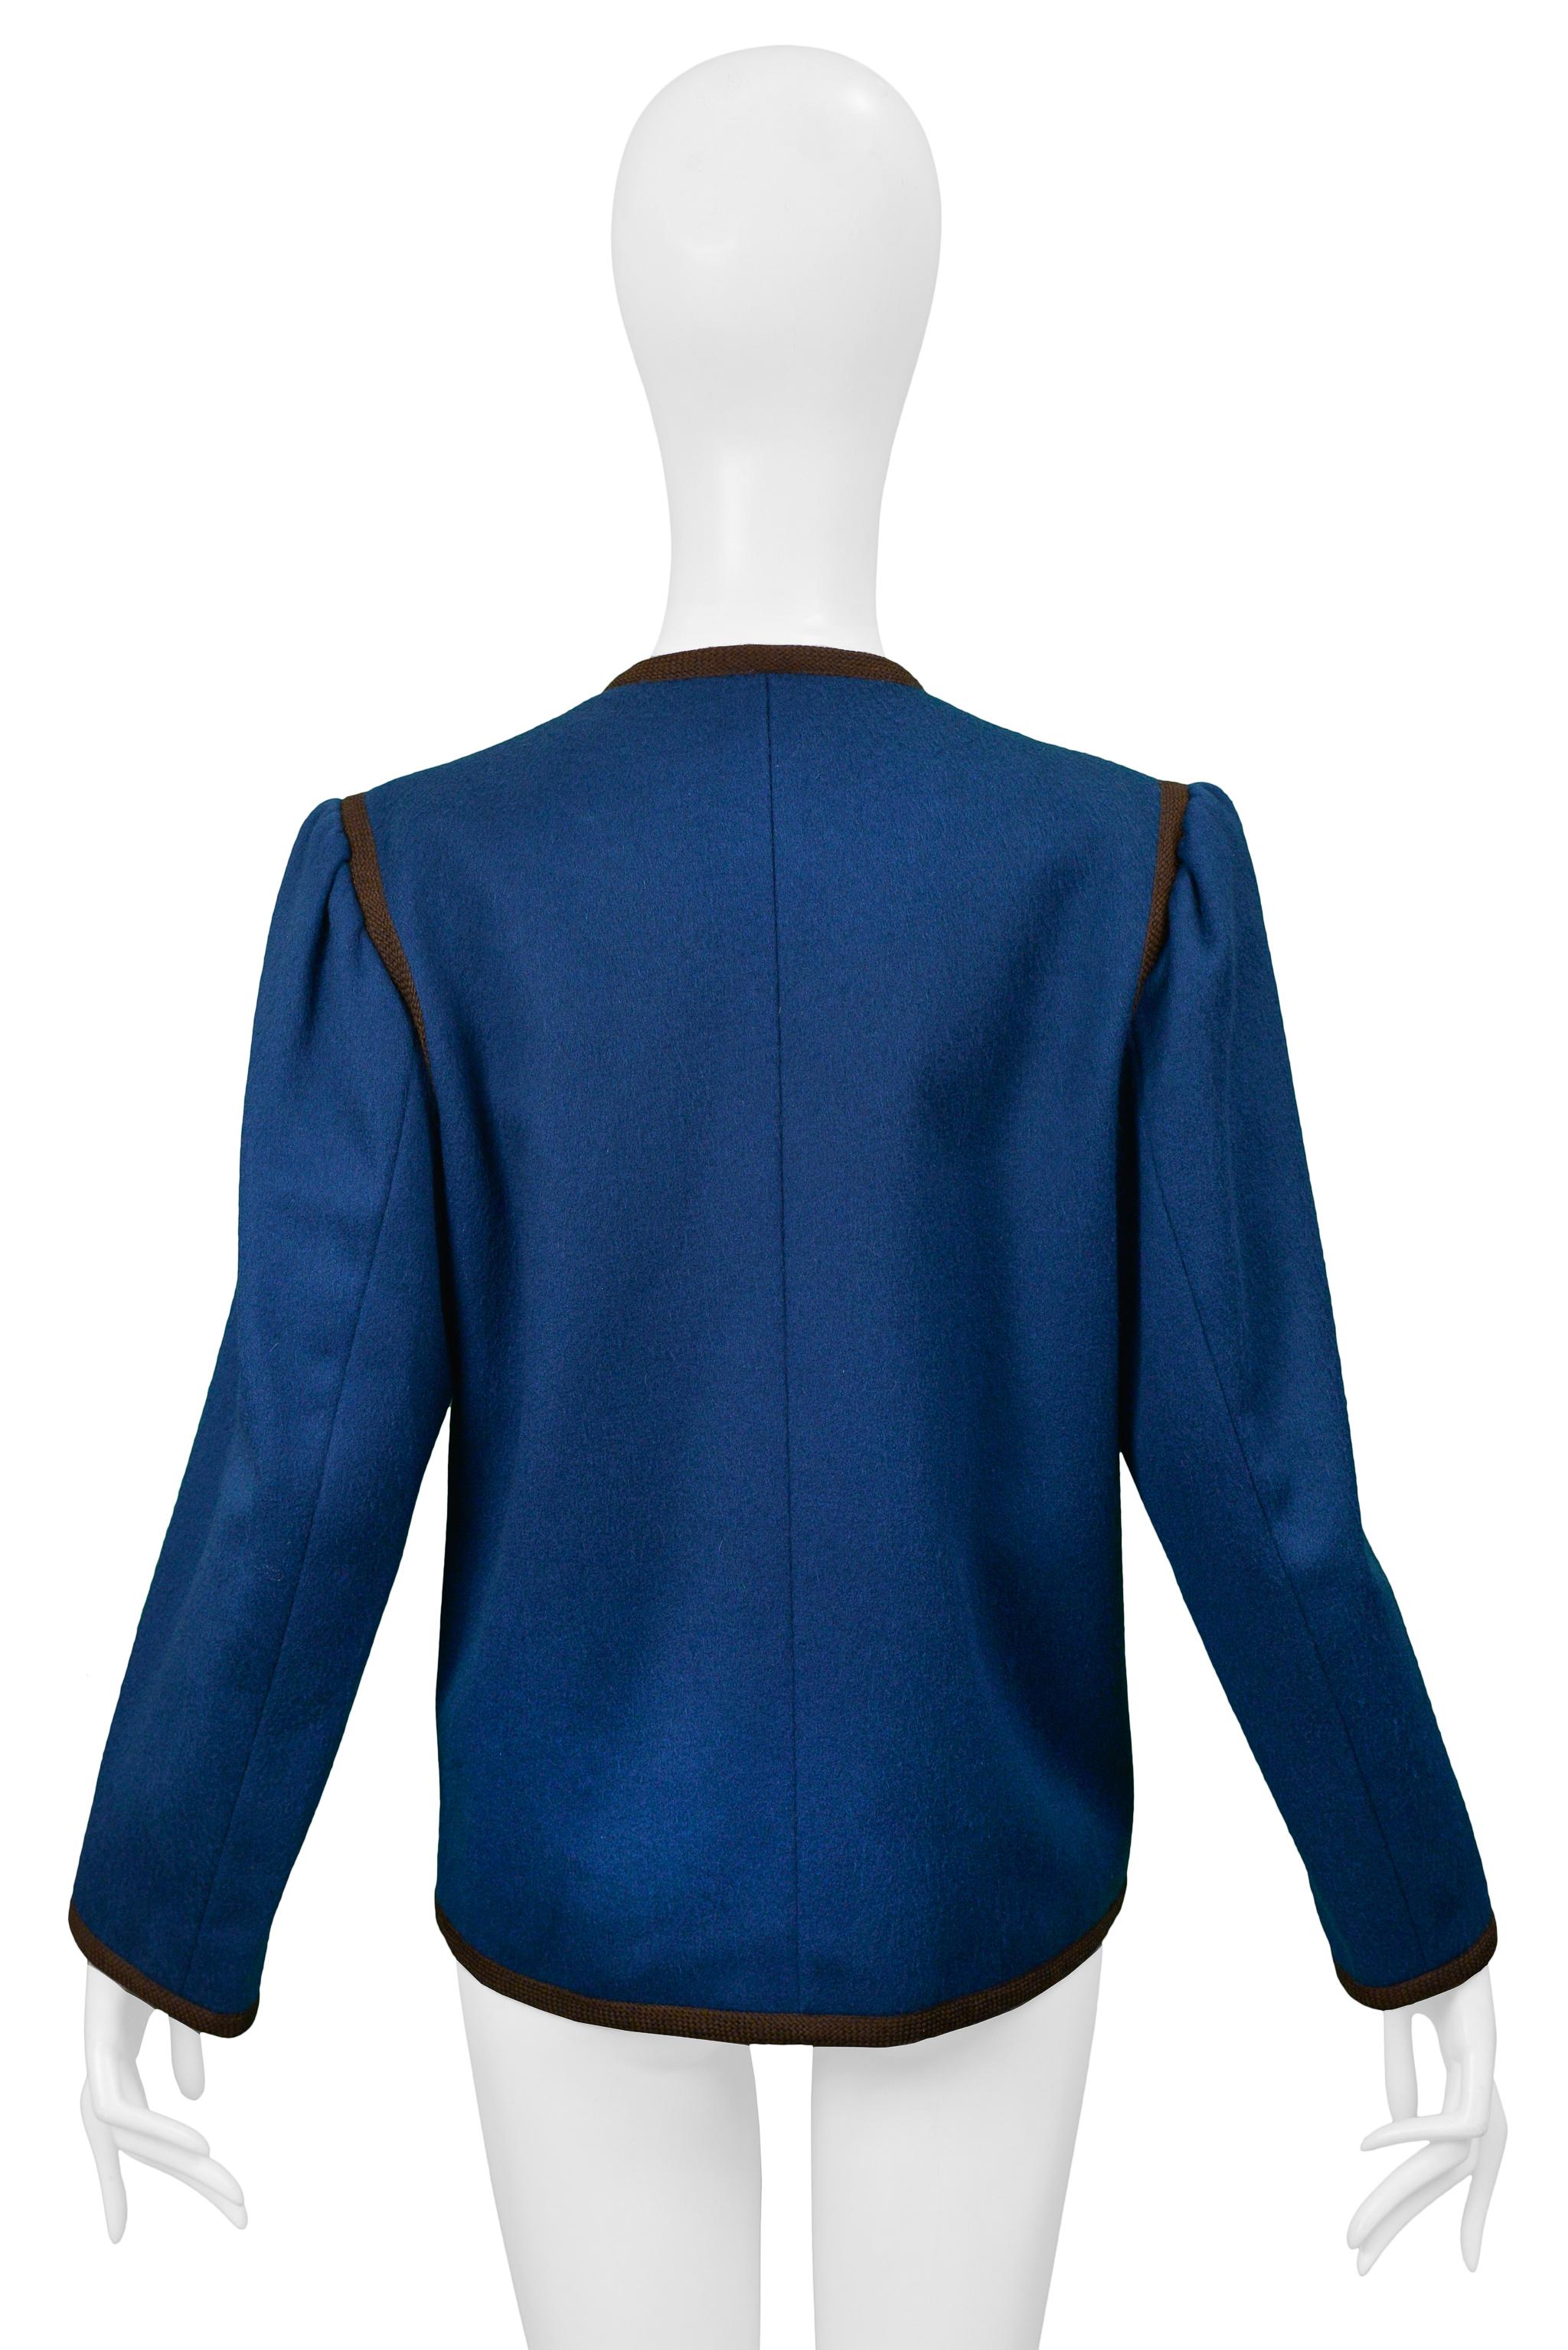 Yves Saint Laurent YSL Blue Wool Cropped Jacket With Brown Trim In Good Condition For Sale In Los Angeles, CA